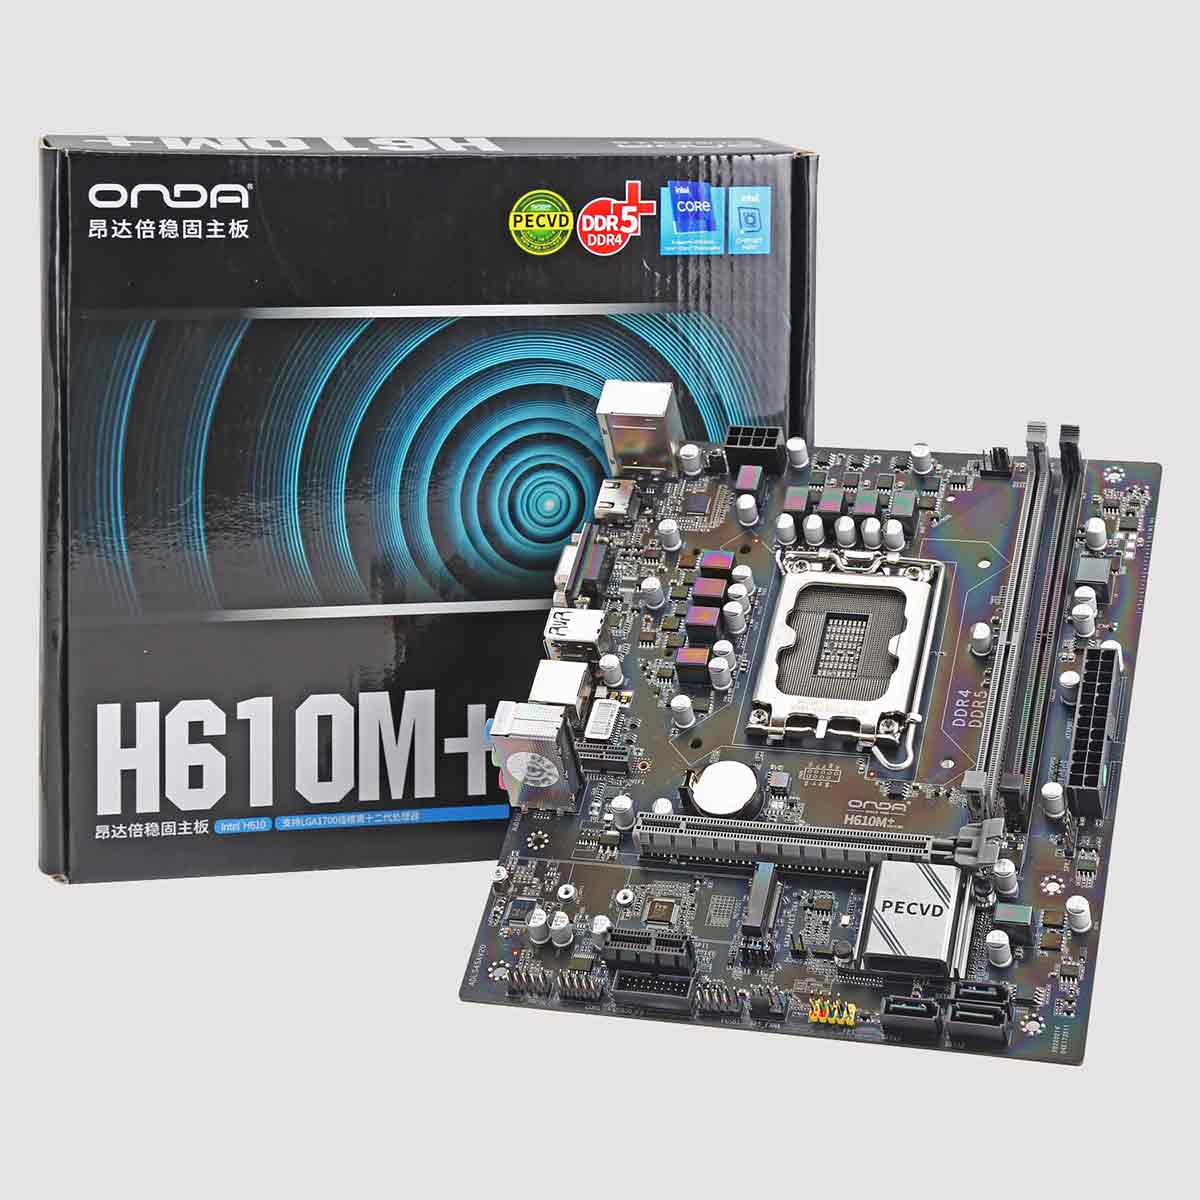 ONDA H610M+: a motherboard with support for DDR4 and DDR5